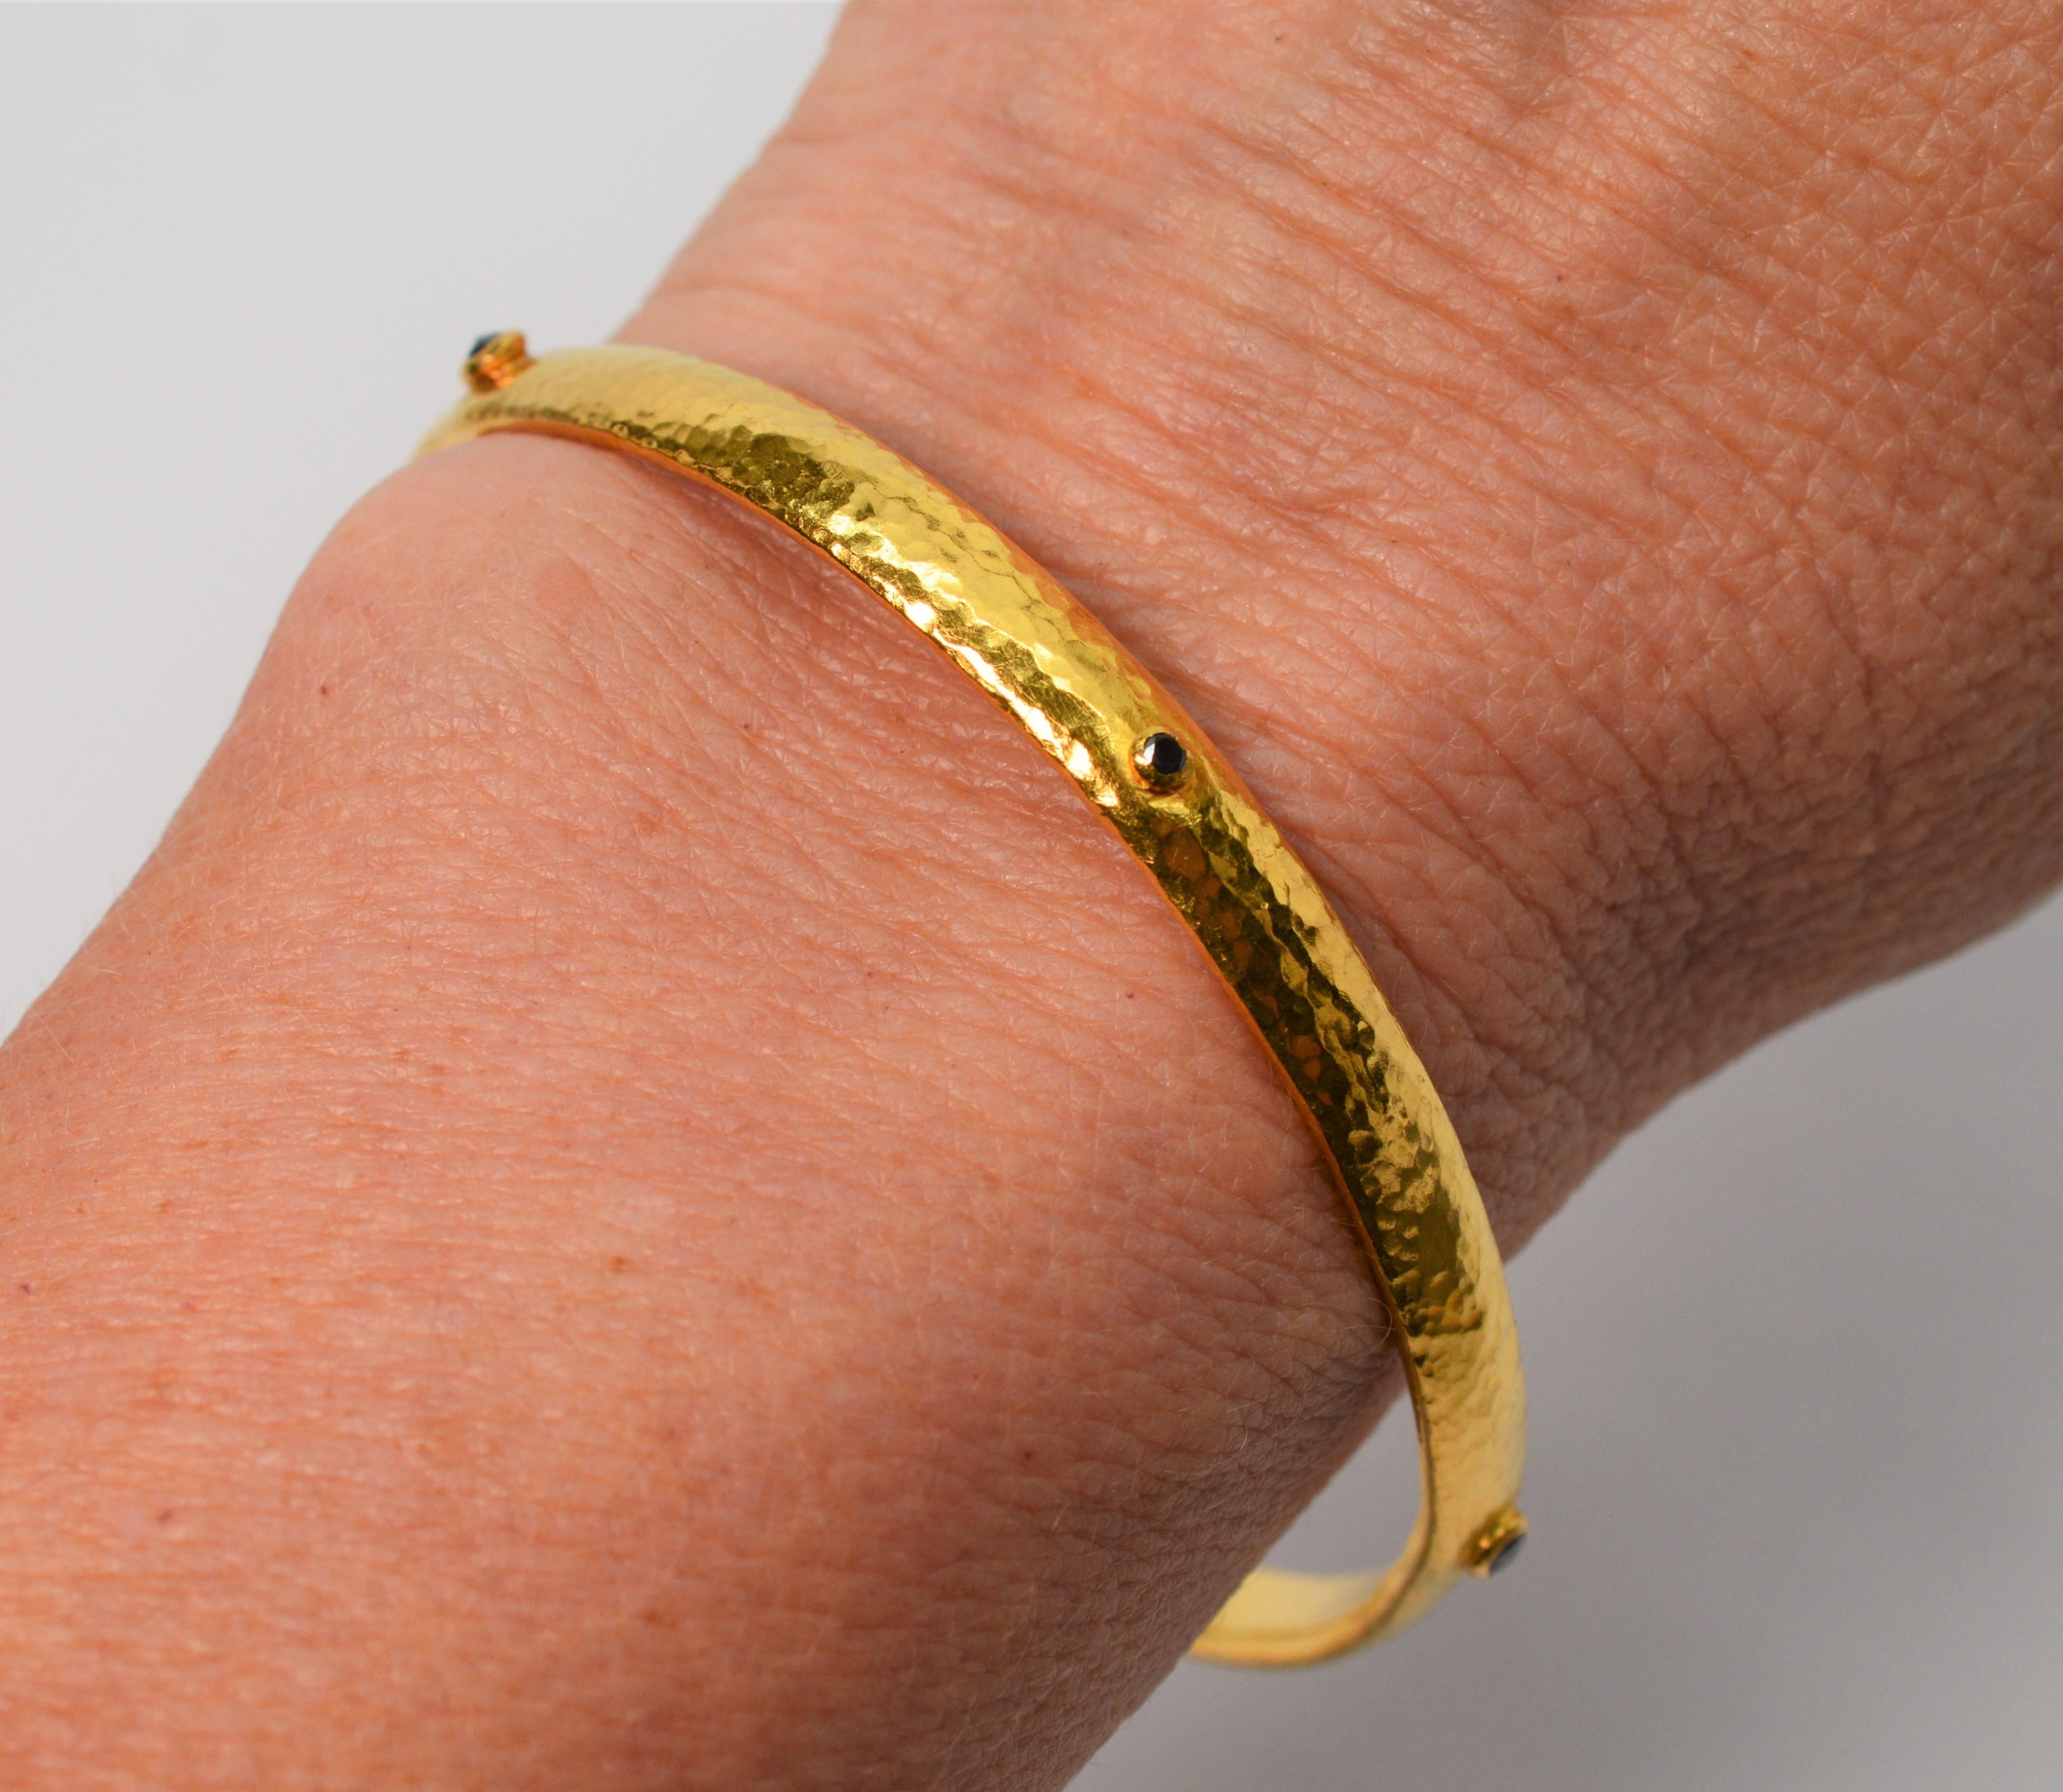 Slender artisan yellow gold bangle bracelet with five faceted sapphire accents by internationally known, Gurhan Atelier. Each piece is hand crafted by specially trained master artisans in the Gurhan Istanbul workshops. Expertly hand hammered lost